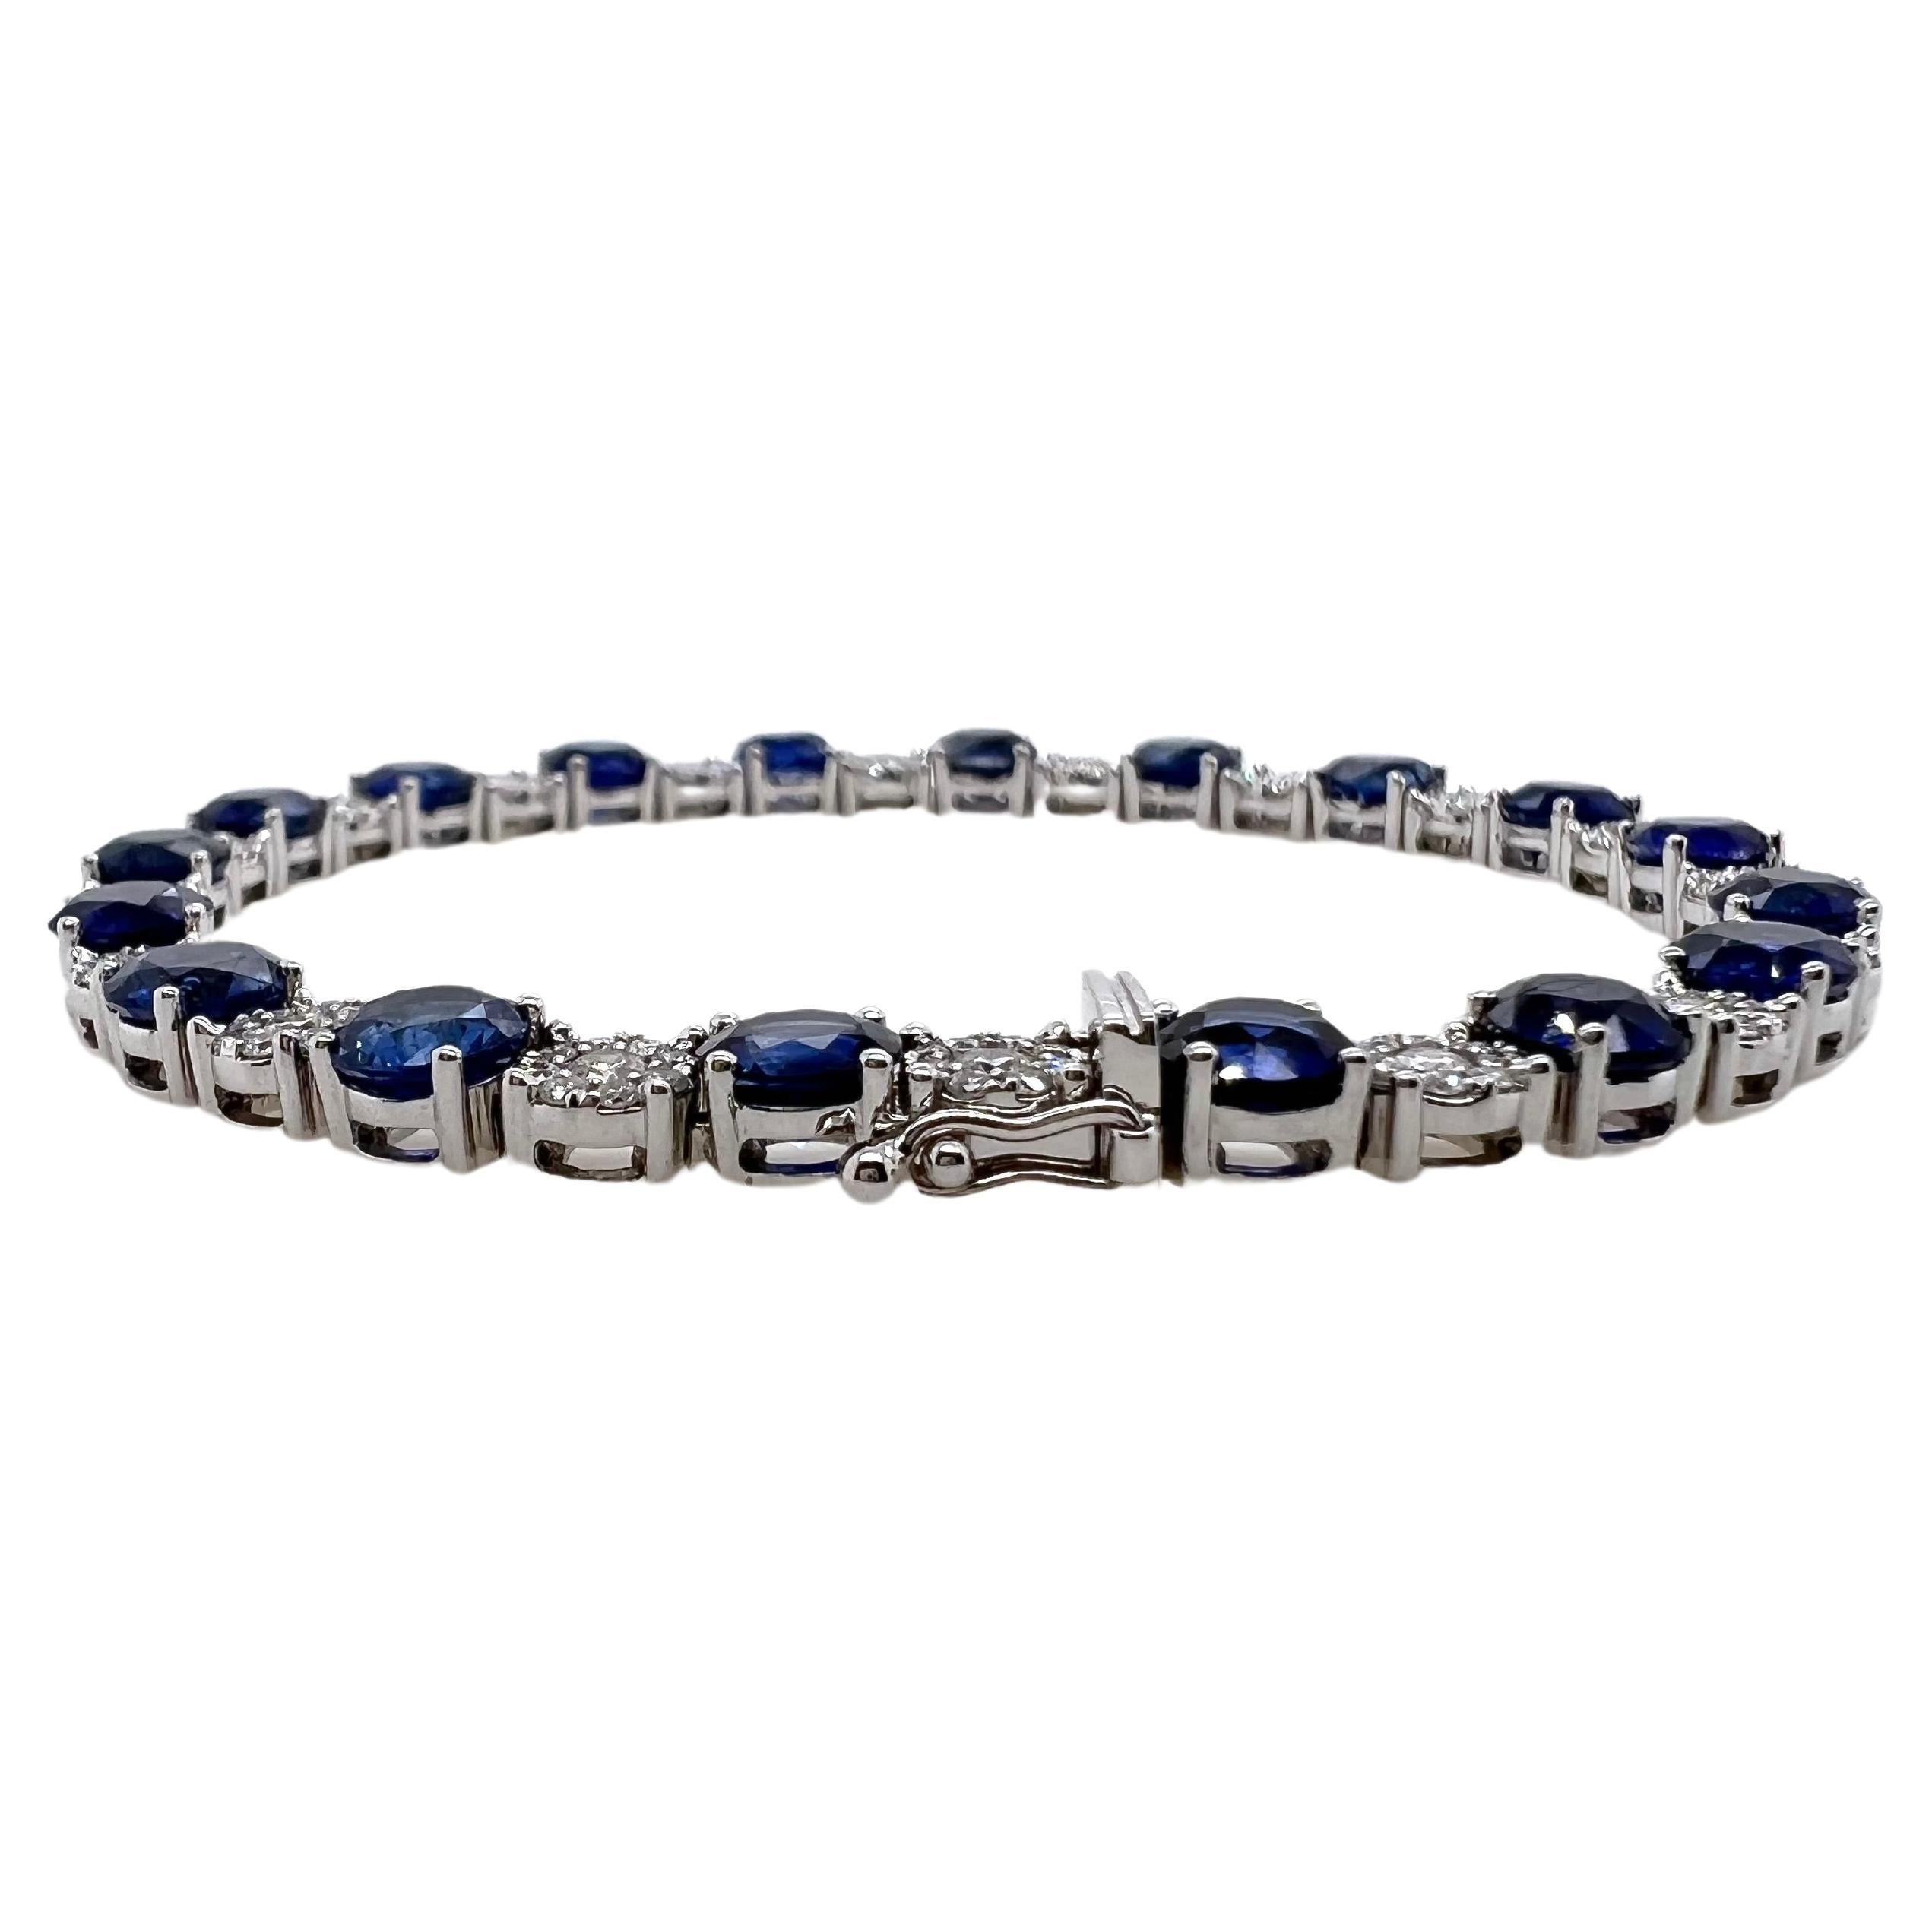 This iconic sapphire and diamond alternating pattern tennis bracelet is breathtaking!  The round, beautiful color sapphire are contrasted by the illusion set diamonds.  The diamonds are actually a small diamond, surrounded by a halo of smaller